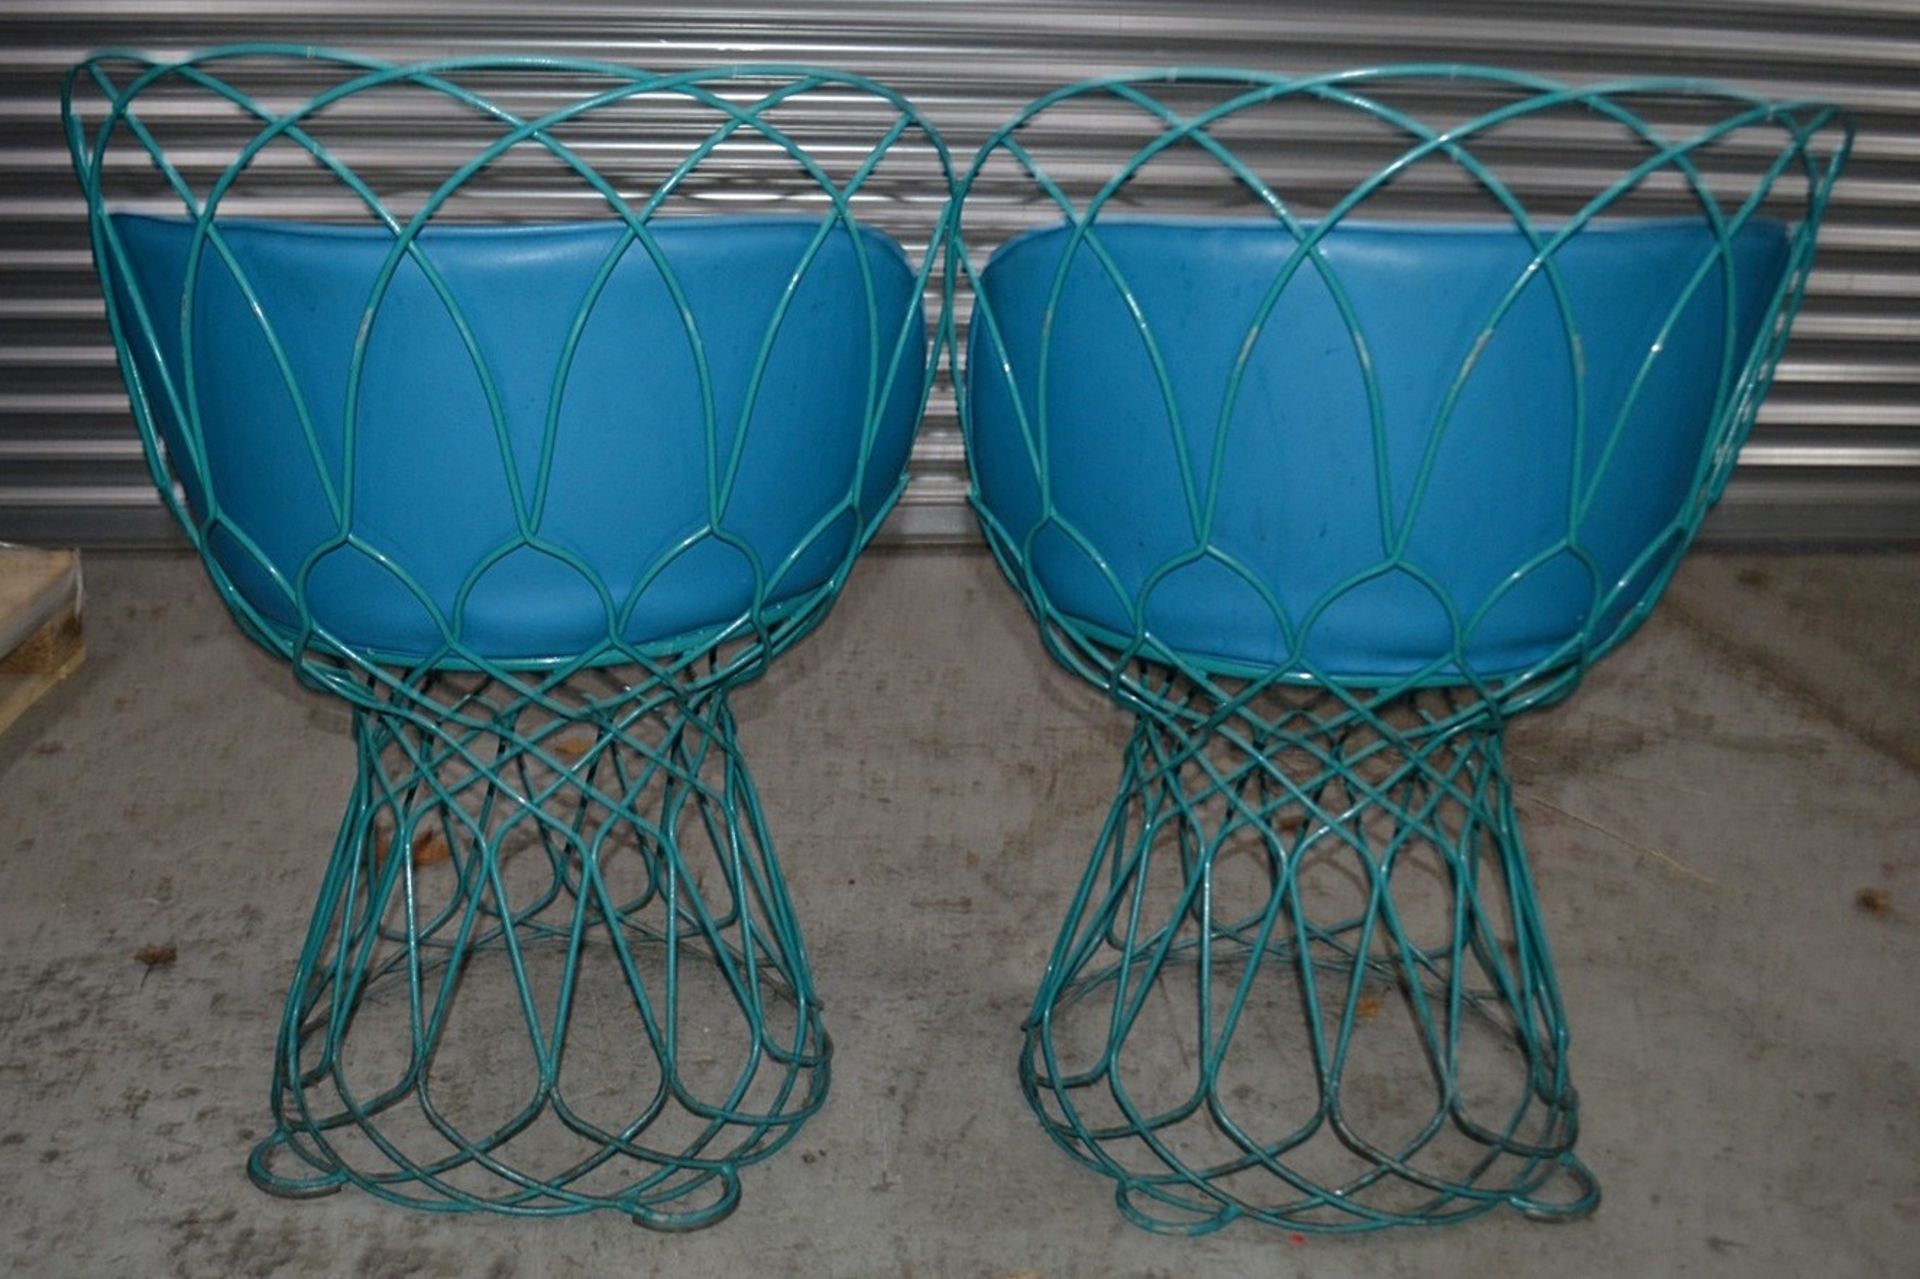 2 x Commercial Outdoor Wire Bistro Chairs With Padded Seats In Blue - Dimensions: H80 x W62 x D45cm - Image 3 of 7